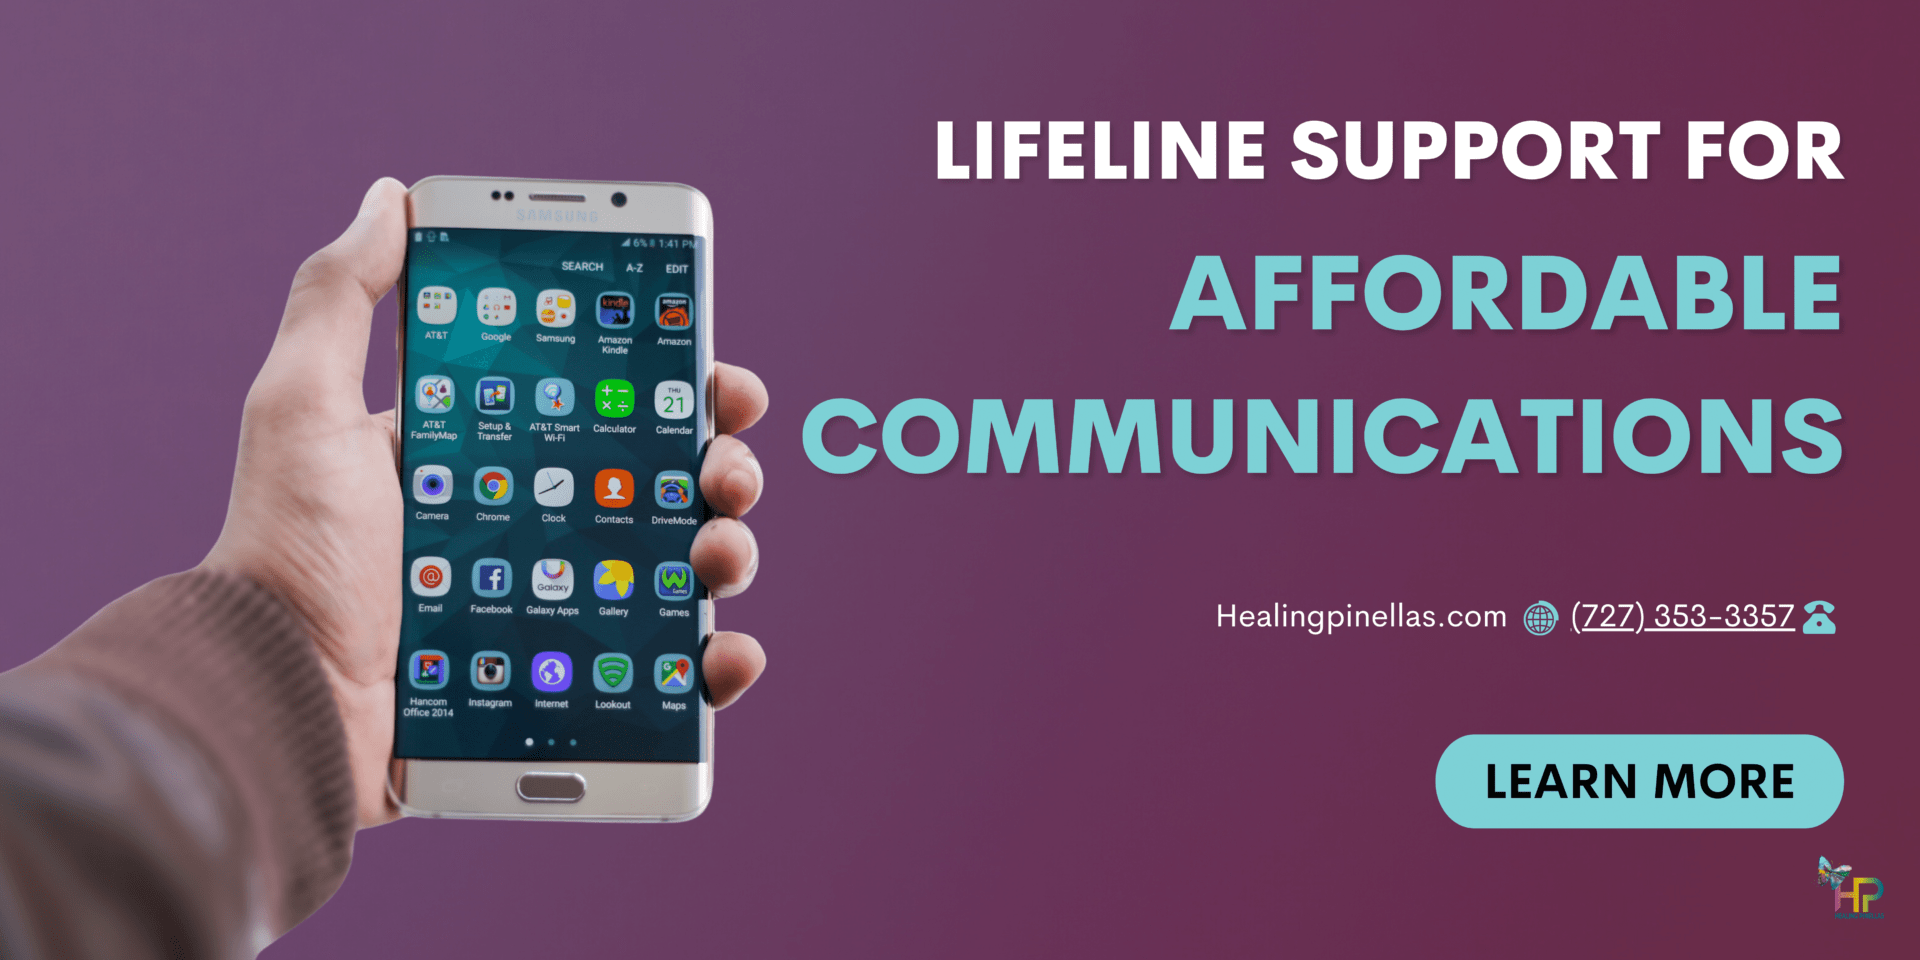 Lifeline Support for Affordable Communications - Free Phone Program